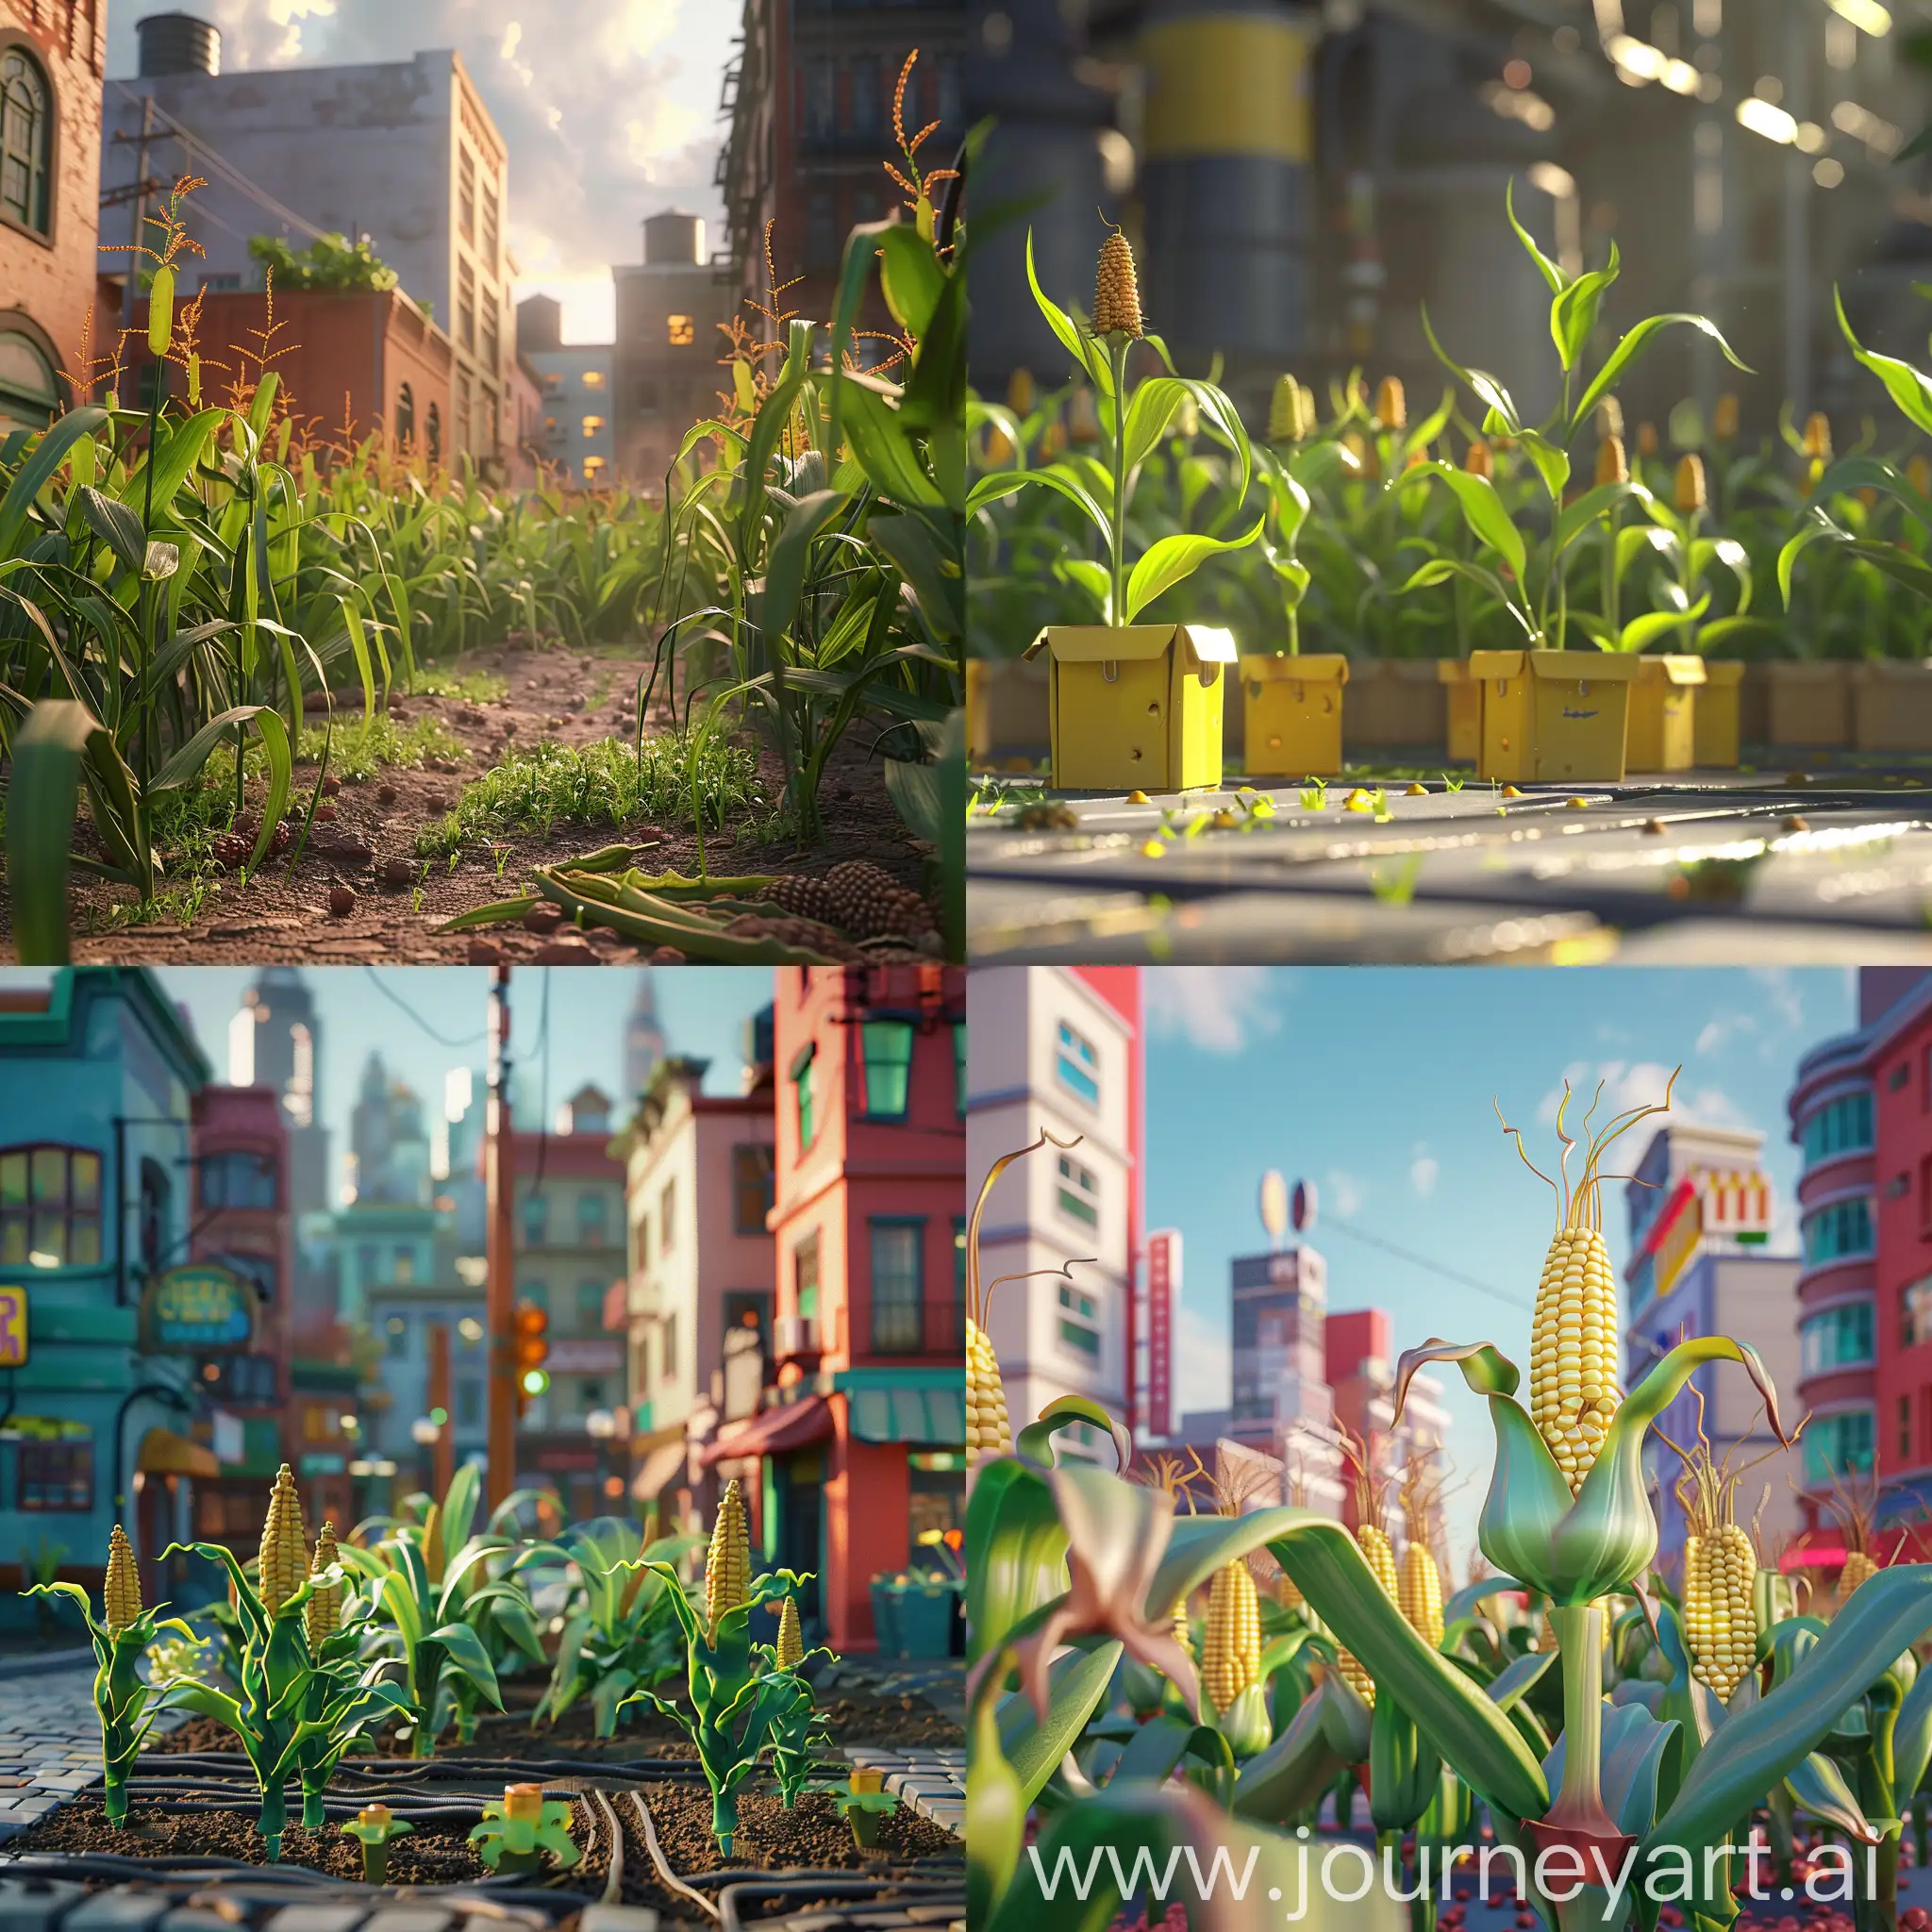 There's a lot of corn growing in the city :: 3D animation